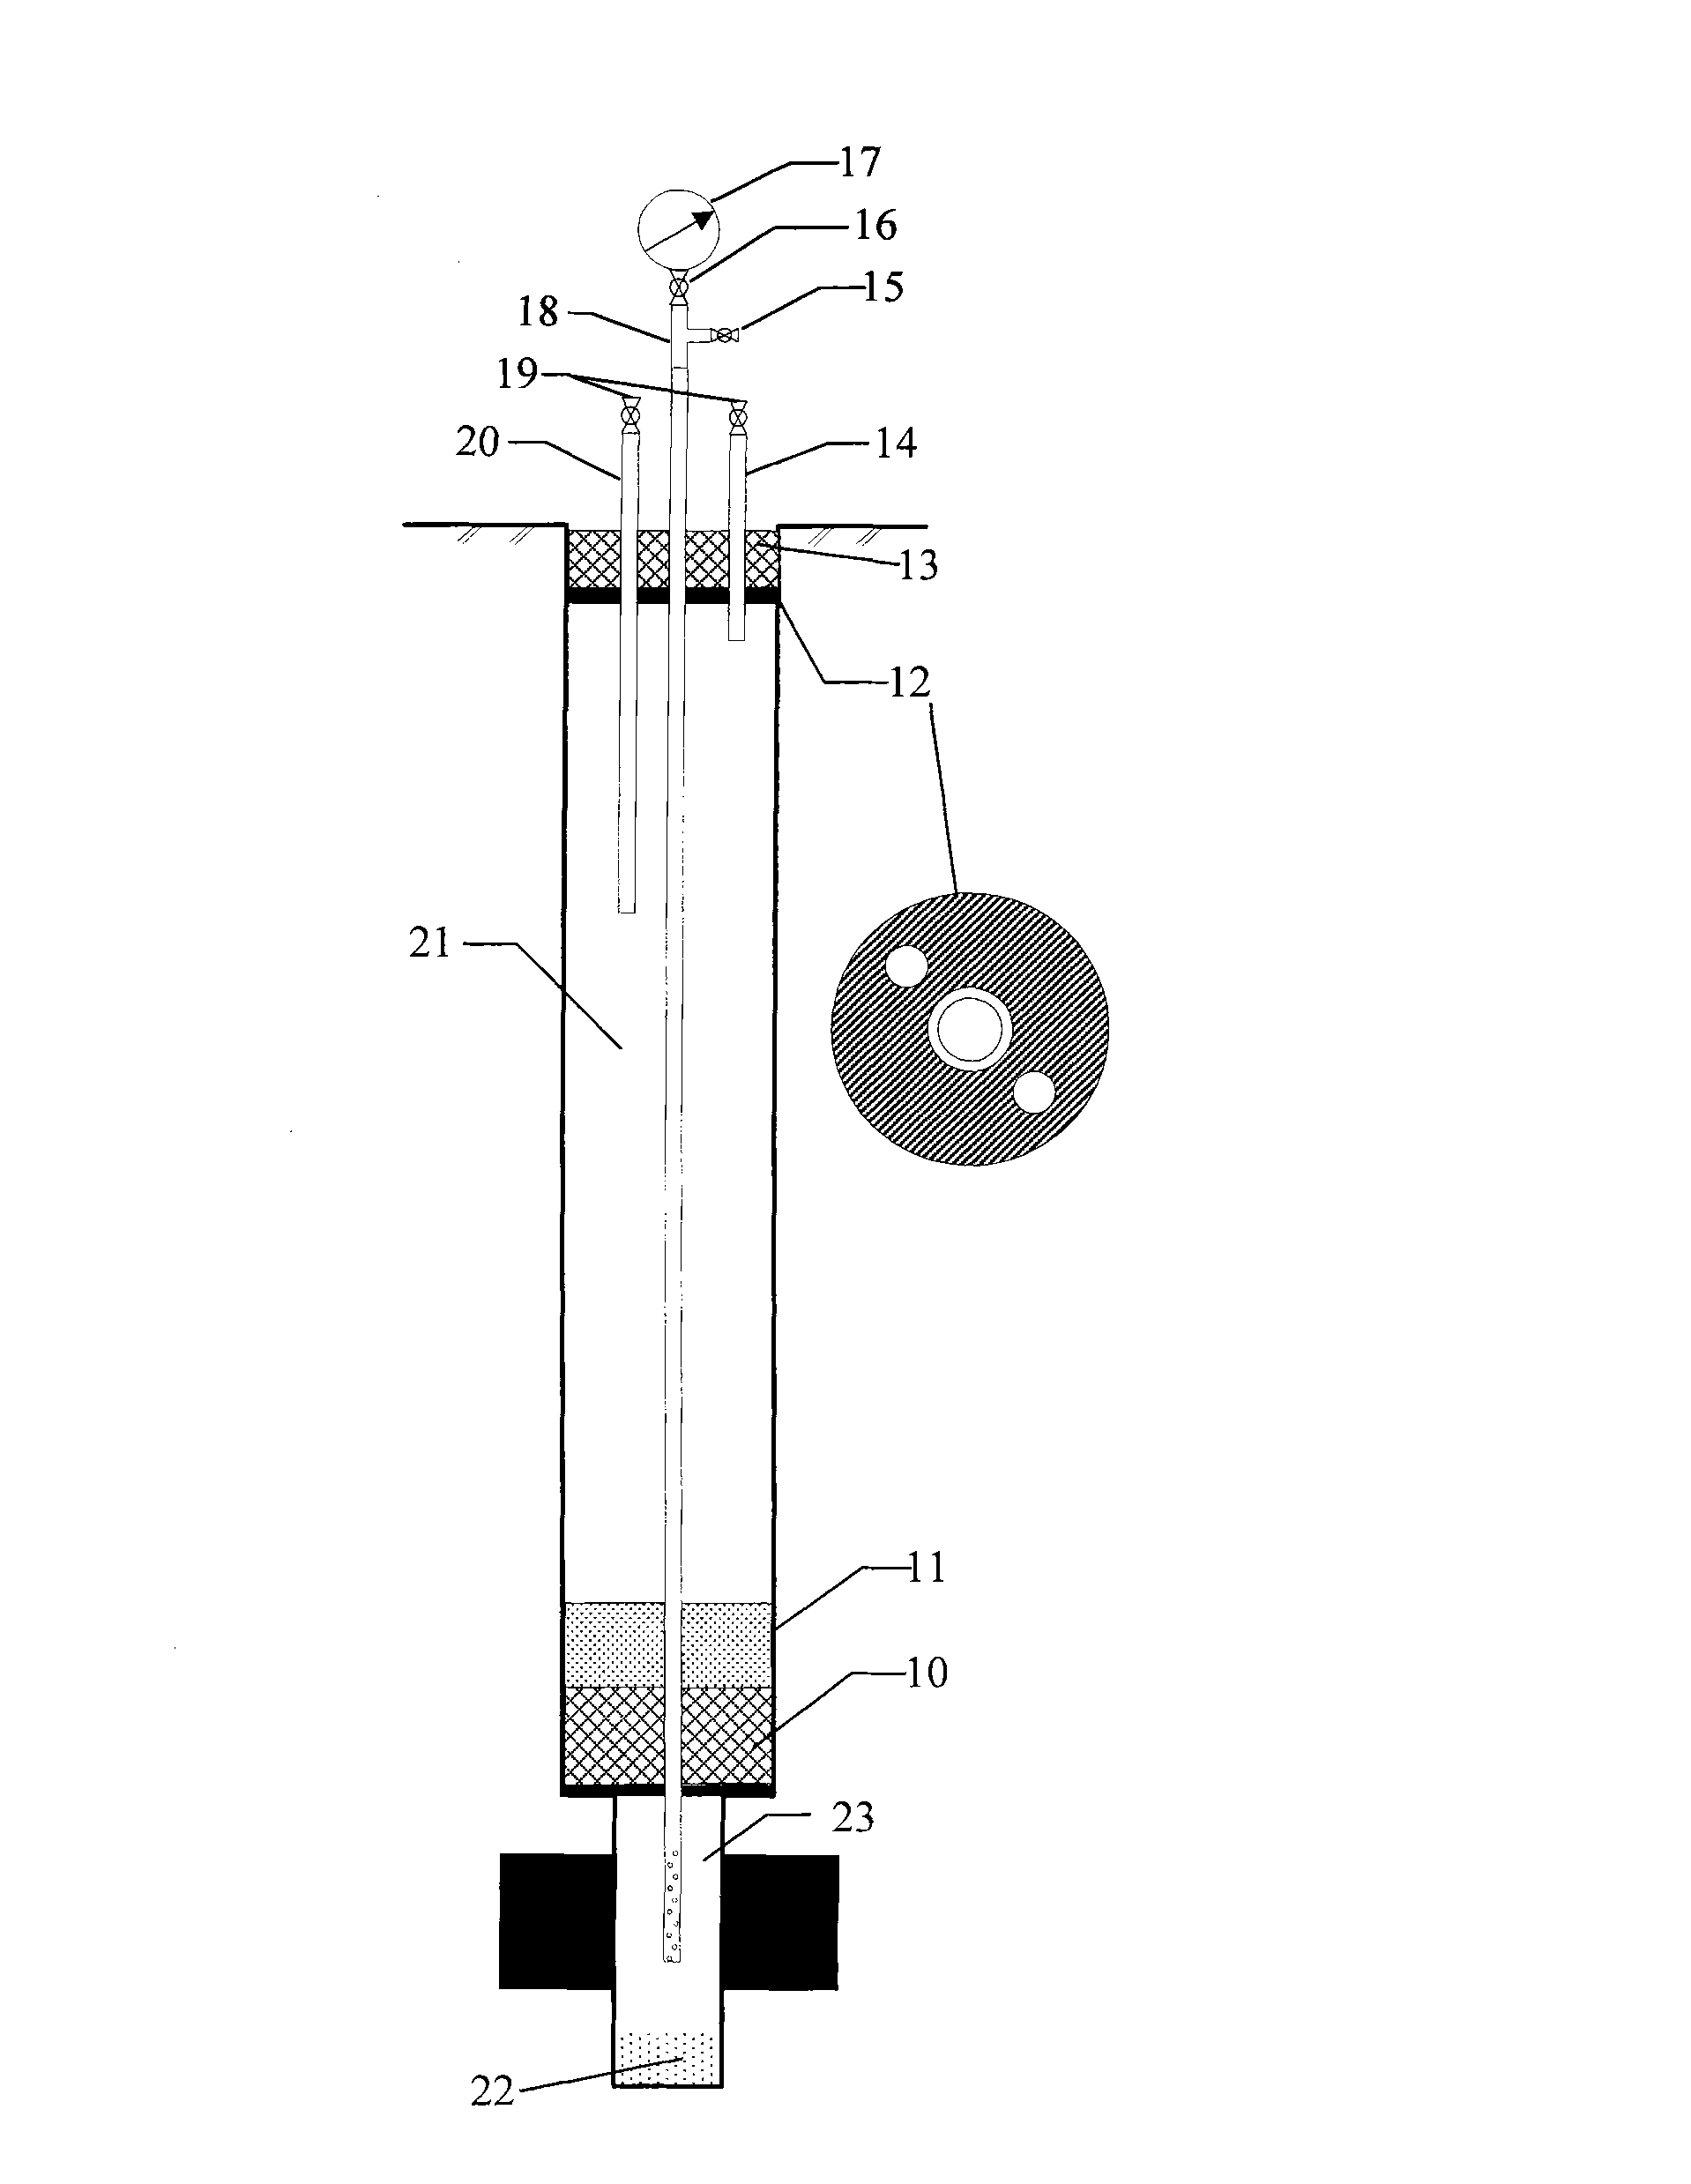 Downward hole pressure measuring device and process